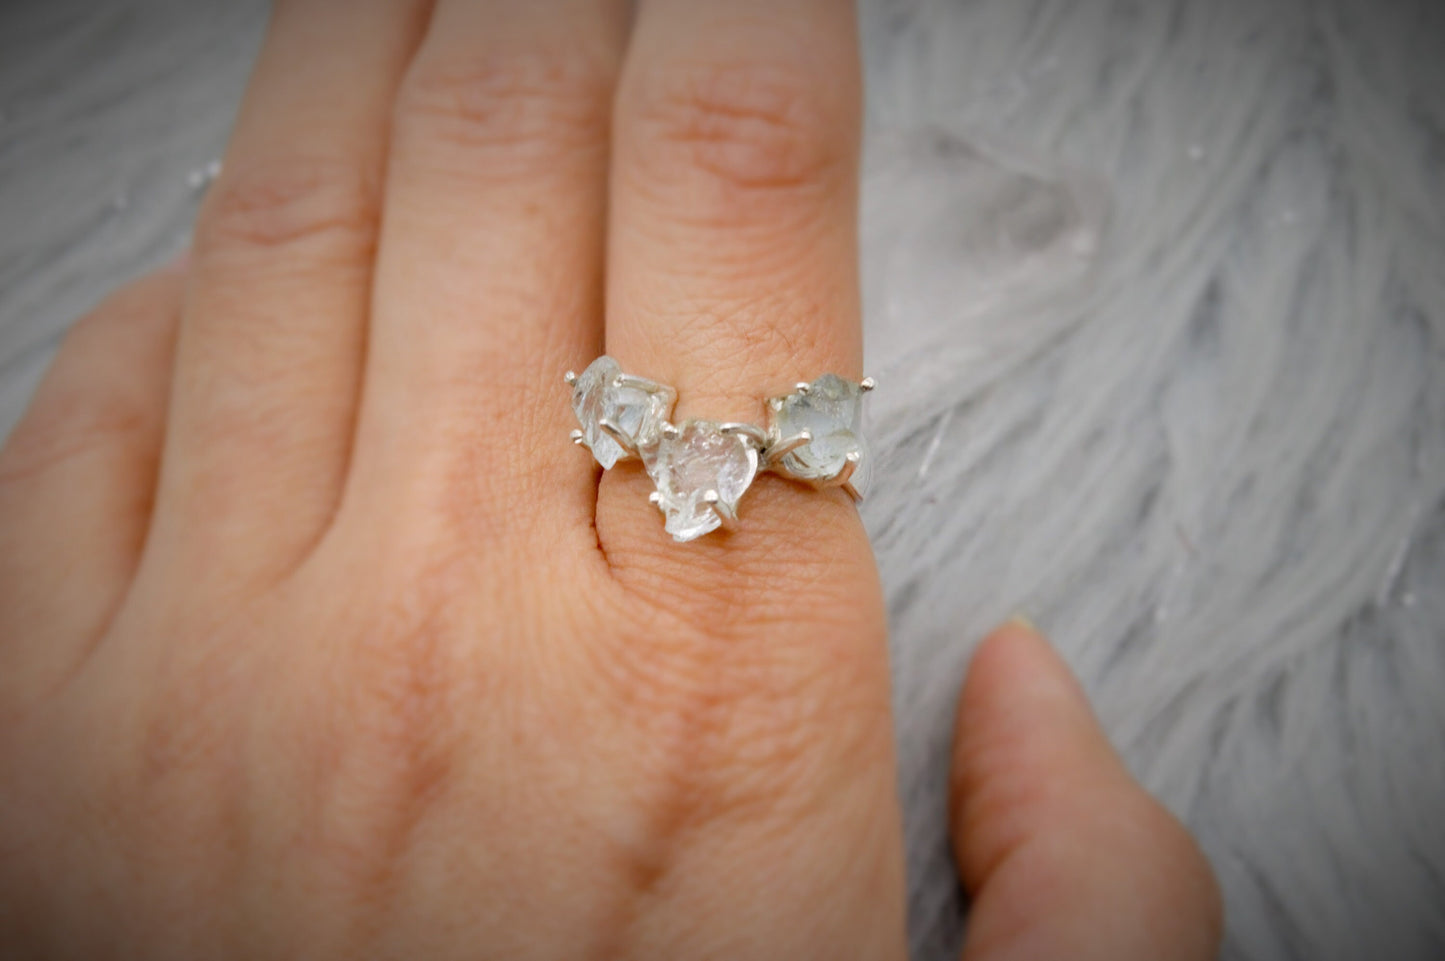 Raw Aquamarine Ring, Sterling Silver Dainty Gemstone Ring, UK Size L, March Birthstone, Aquamarine Jewelry, Rings For Women, Mothers Day